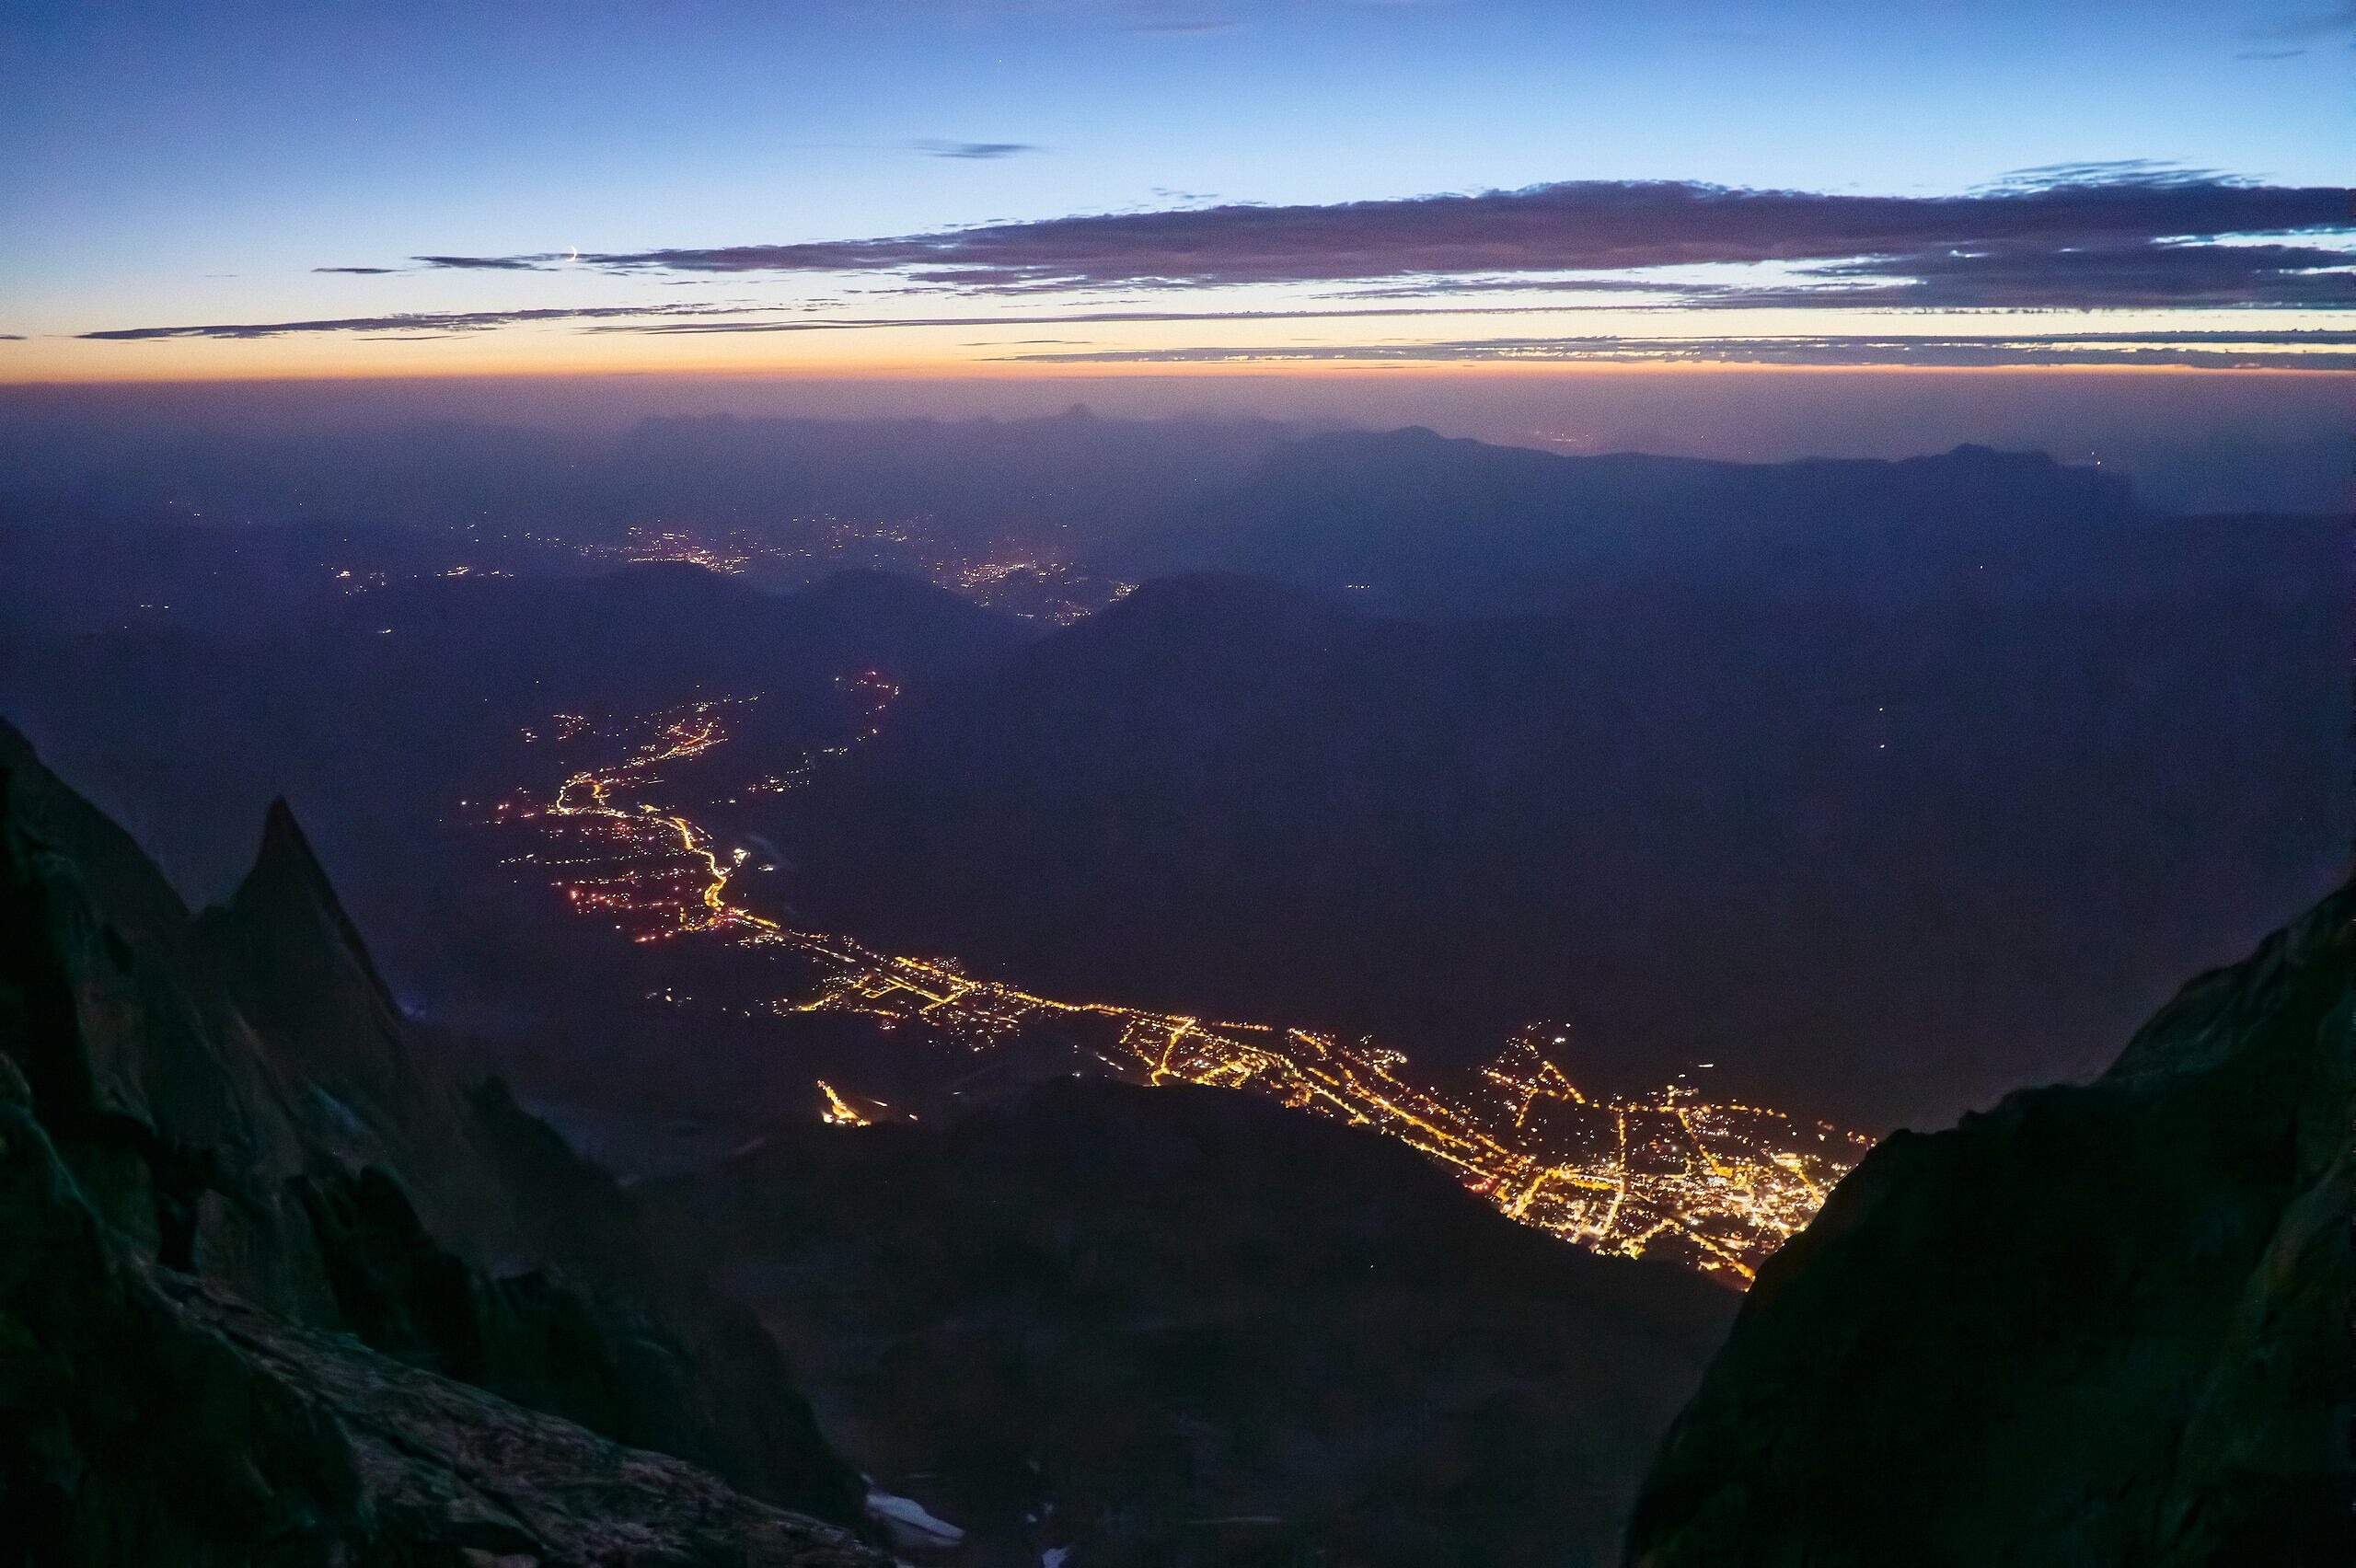 The Chamonix valley at night from below the summit of the Blaitière  © Hamish Frost